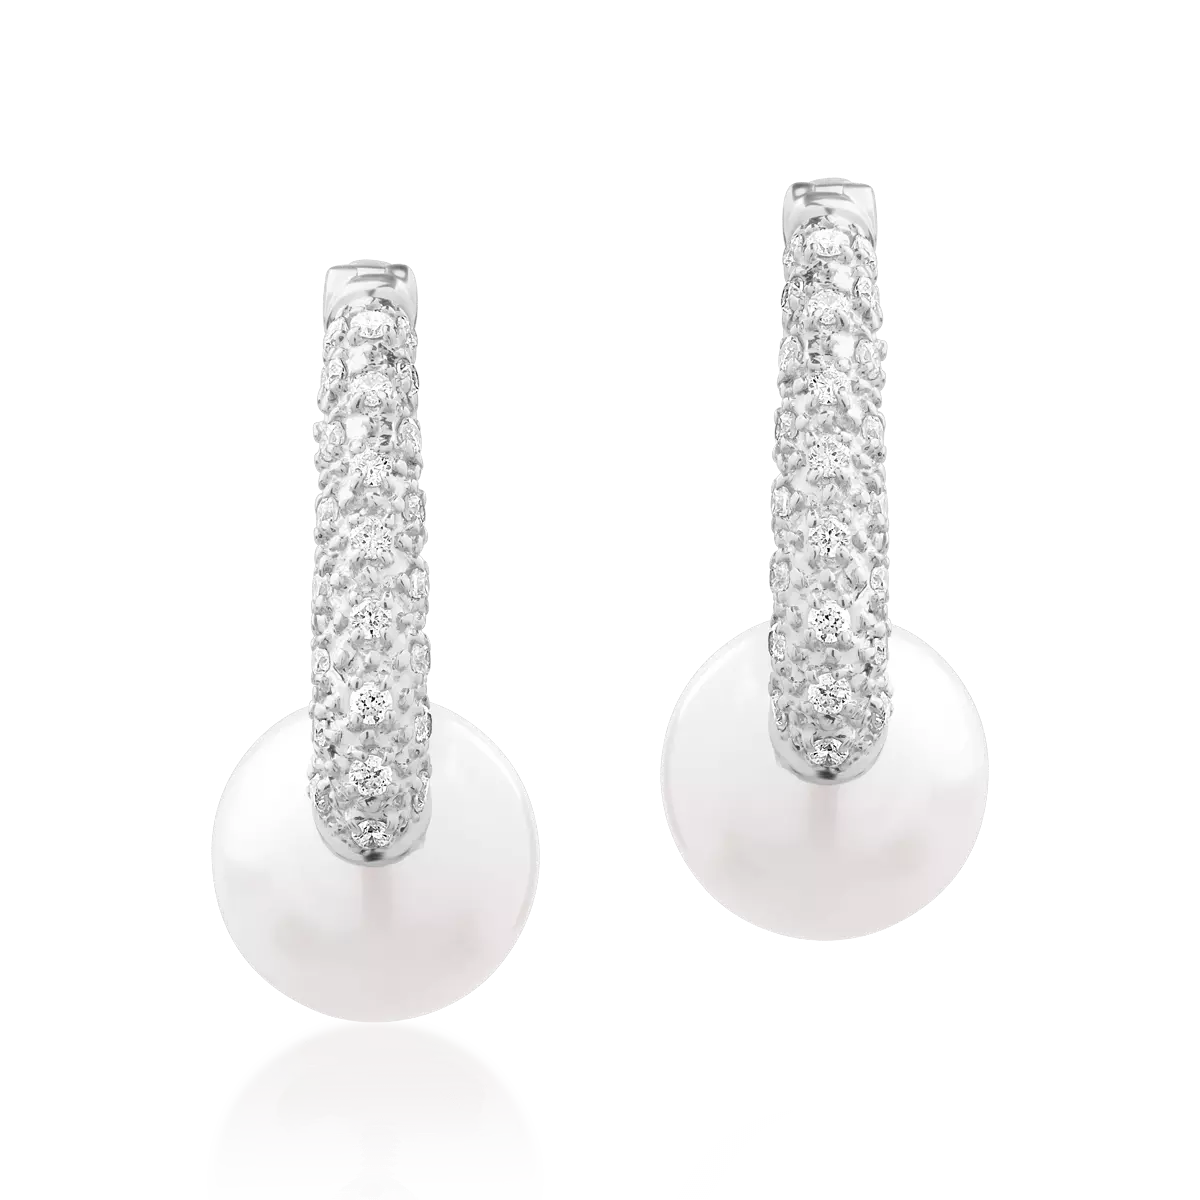 14K white gold earrings with 5.171ct fresh water cultured pearls and 0.17ct diamonds